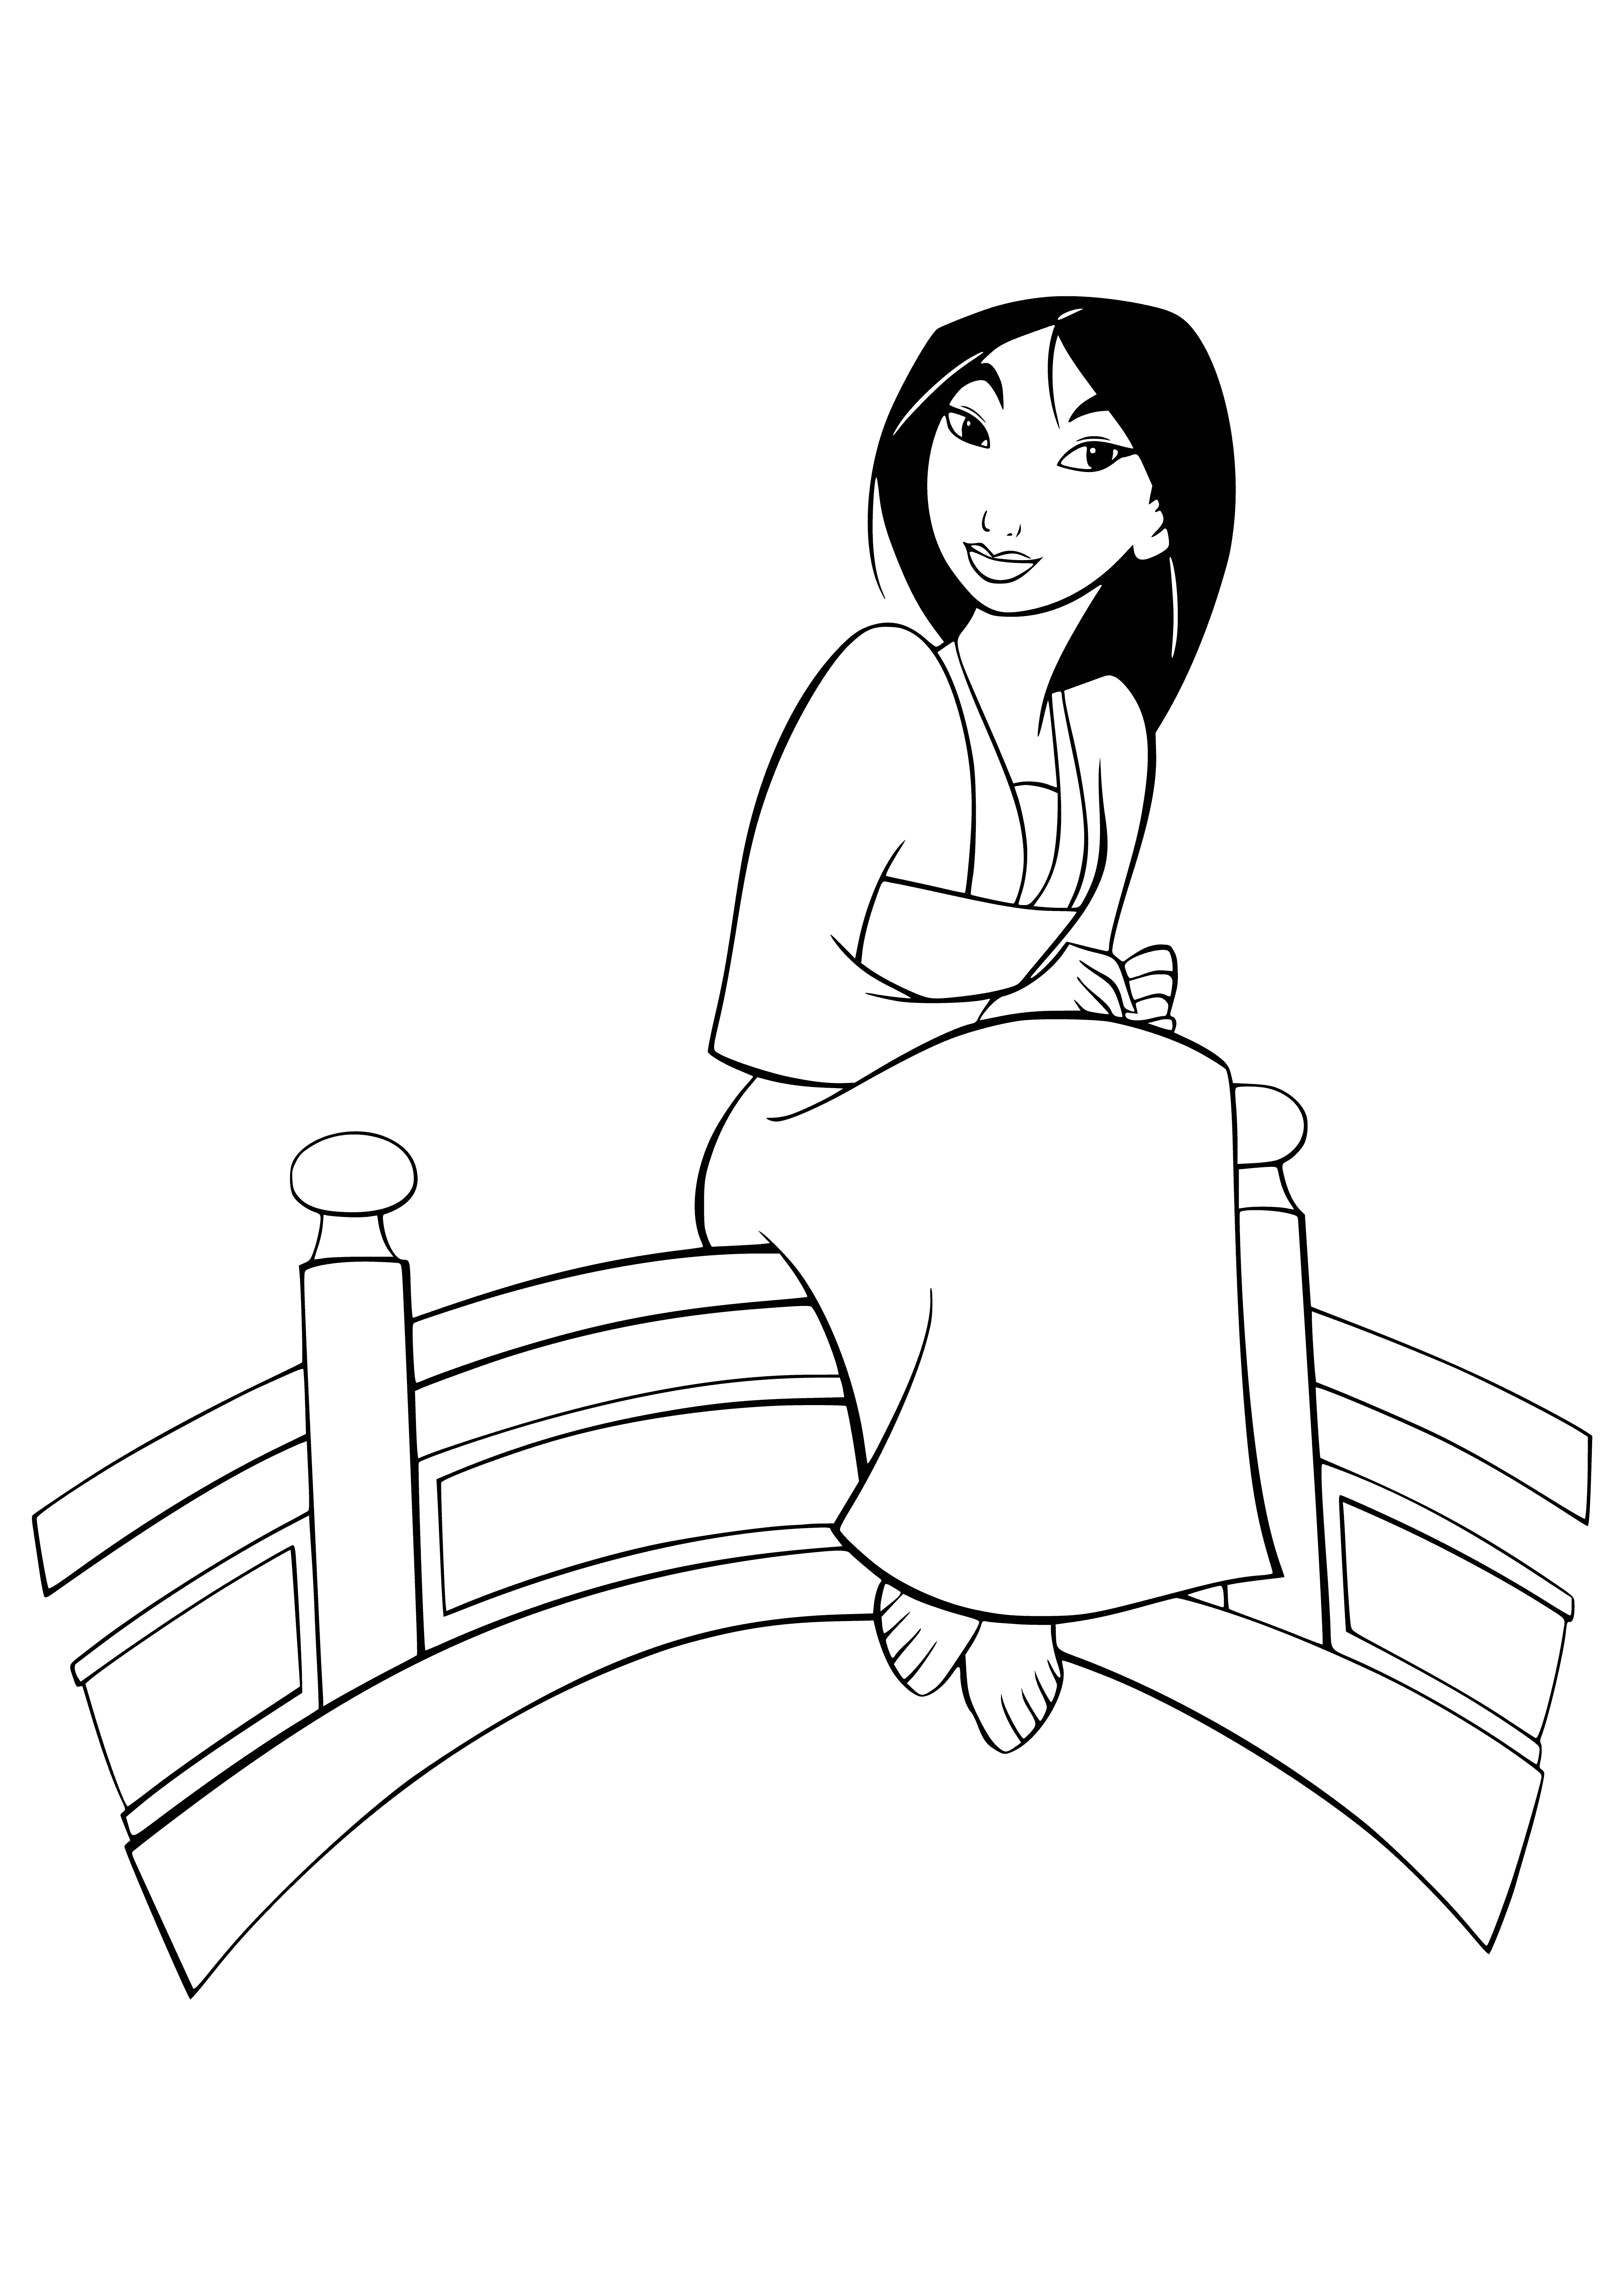 coloring page: Mulan stands confidently, ready to face her destiny with courage. She is dressed in traditional Chinese clothing and holds a red flag, symbolizing her determination.